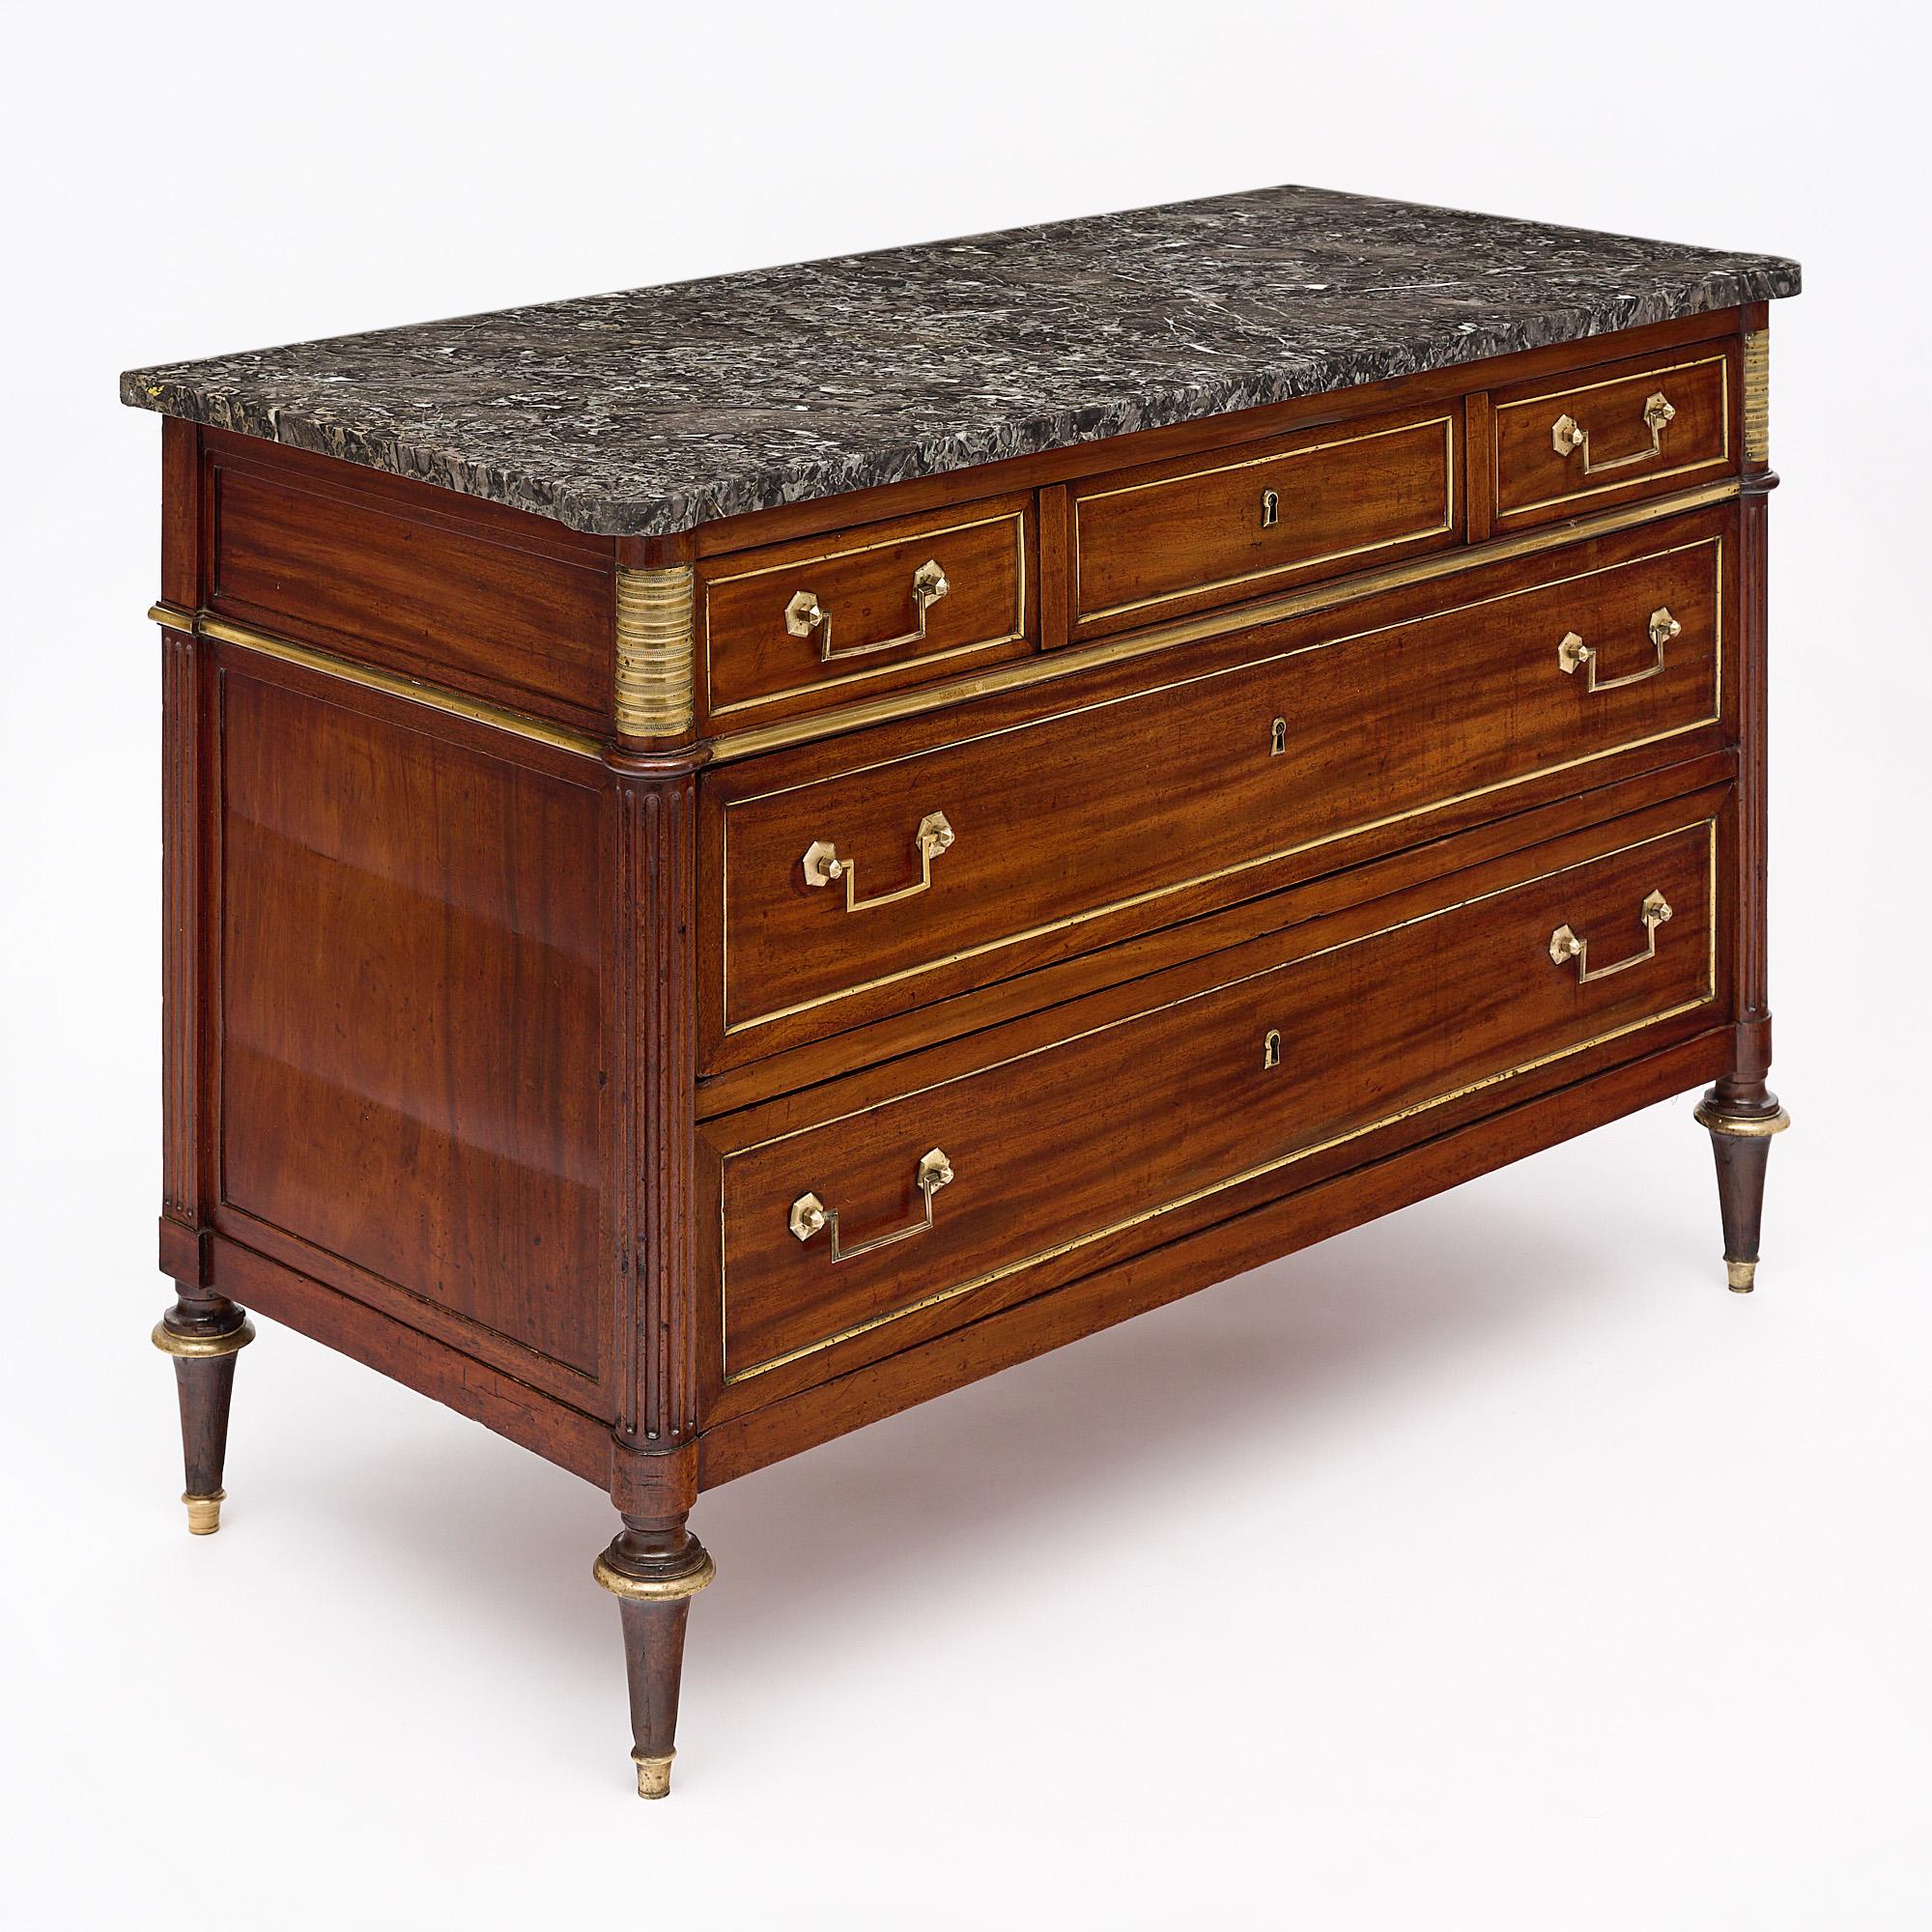 Chest of drawers, commode, French, Louis XVI period, of figured mahogany, five dovetailed drawers, oak as a secondary wood, gilt brass and hardware throughout. The chest is finished in a lustrous French polish and features an intact “Sainte Anne